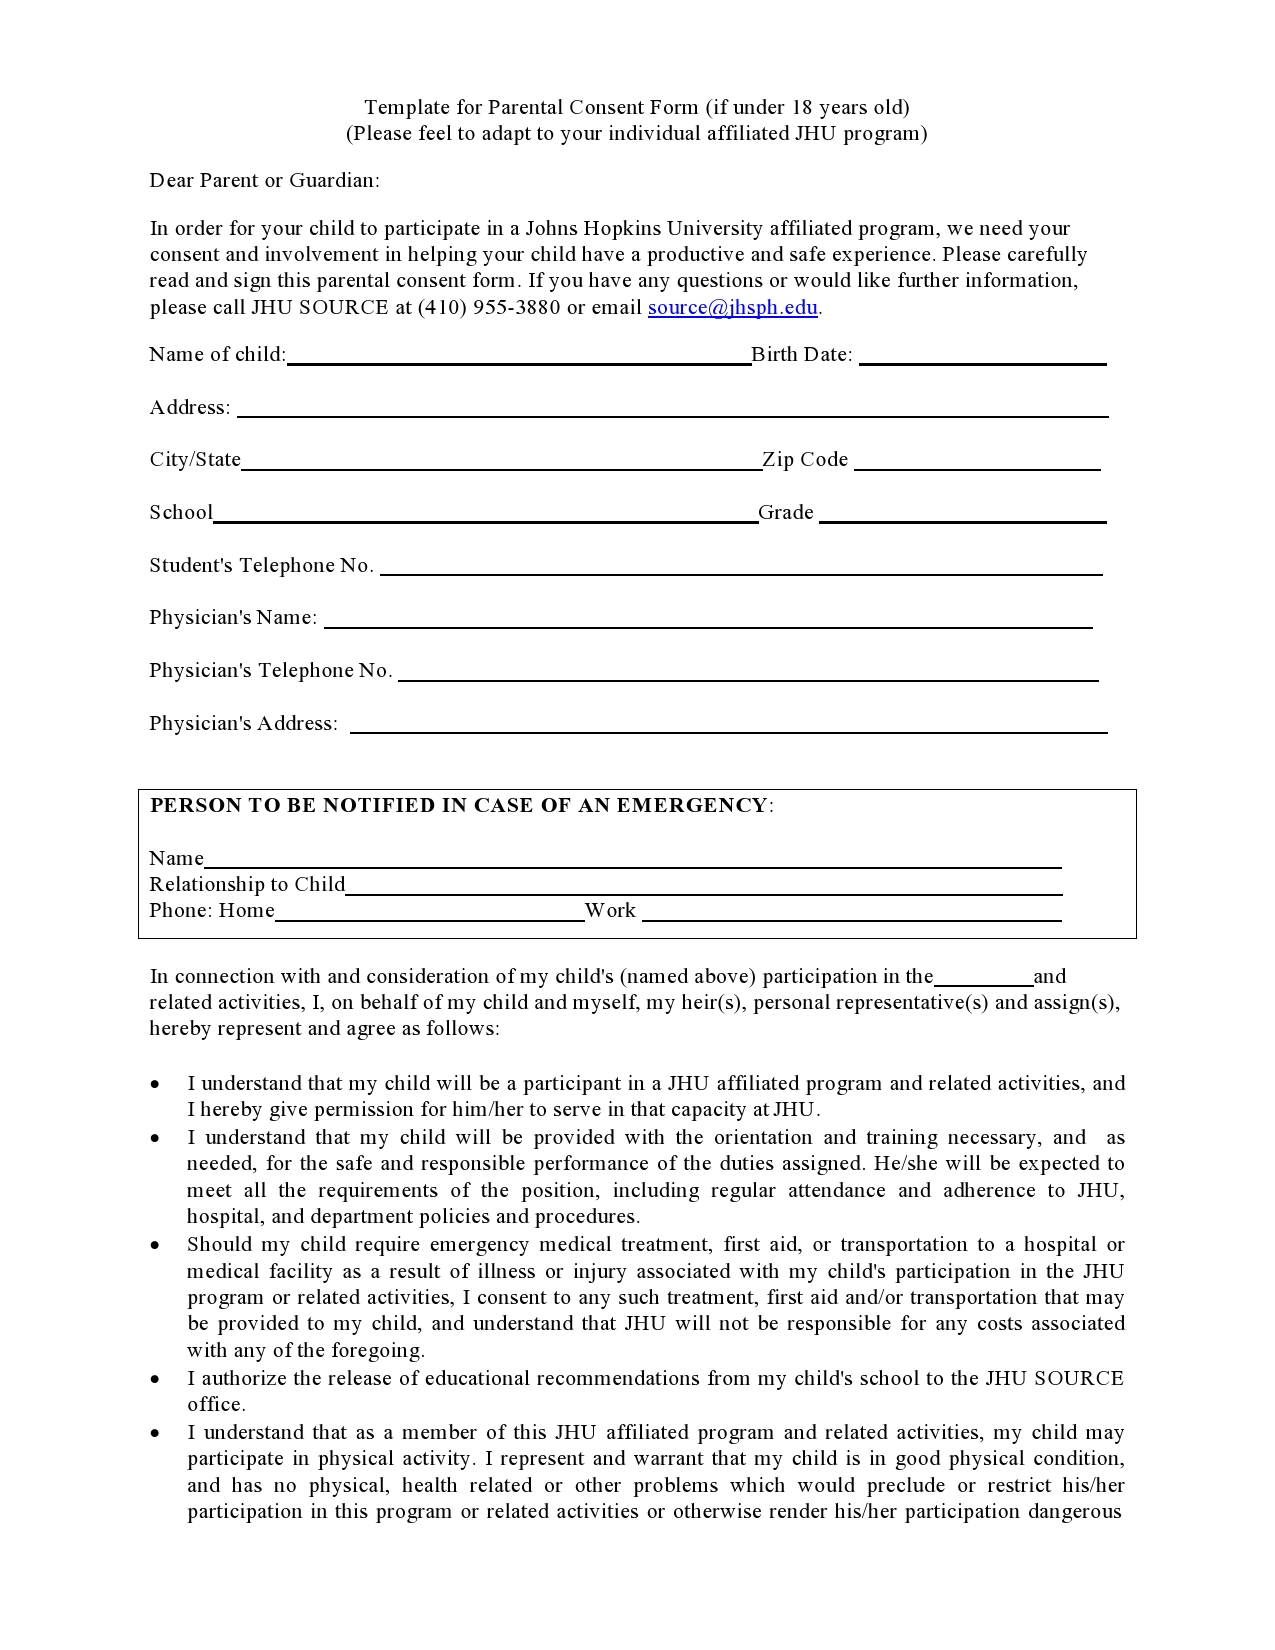 Free medical consent form for minor 14